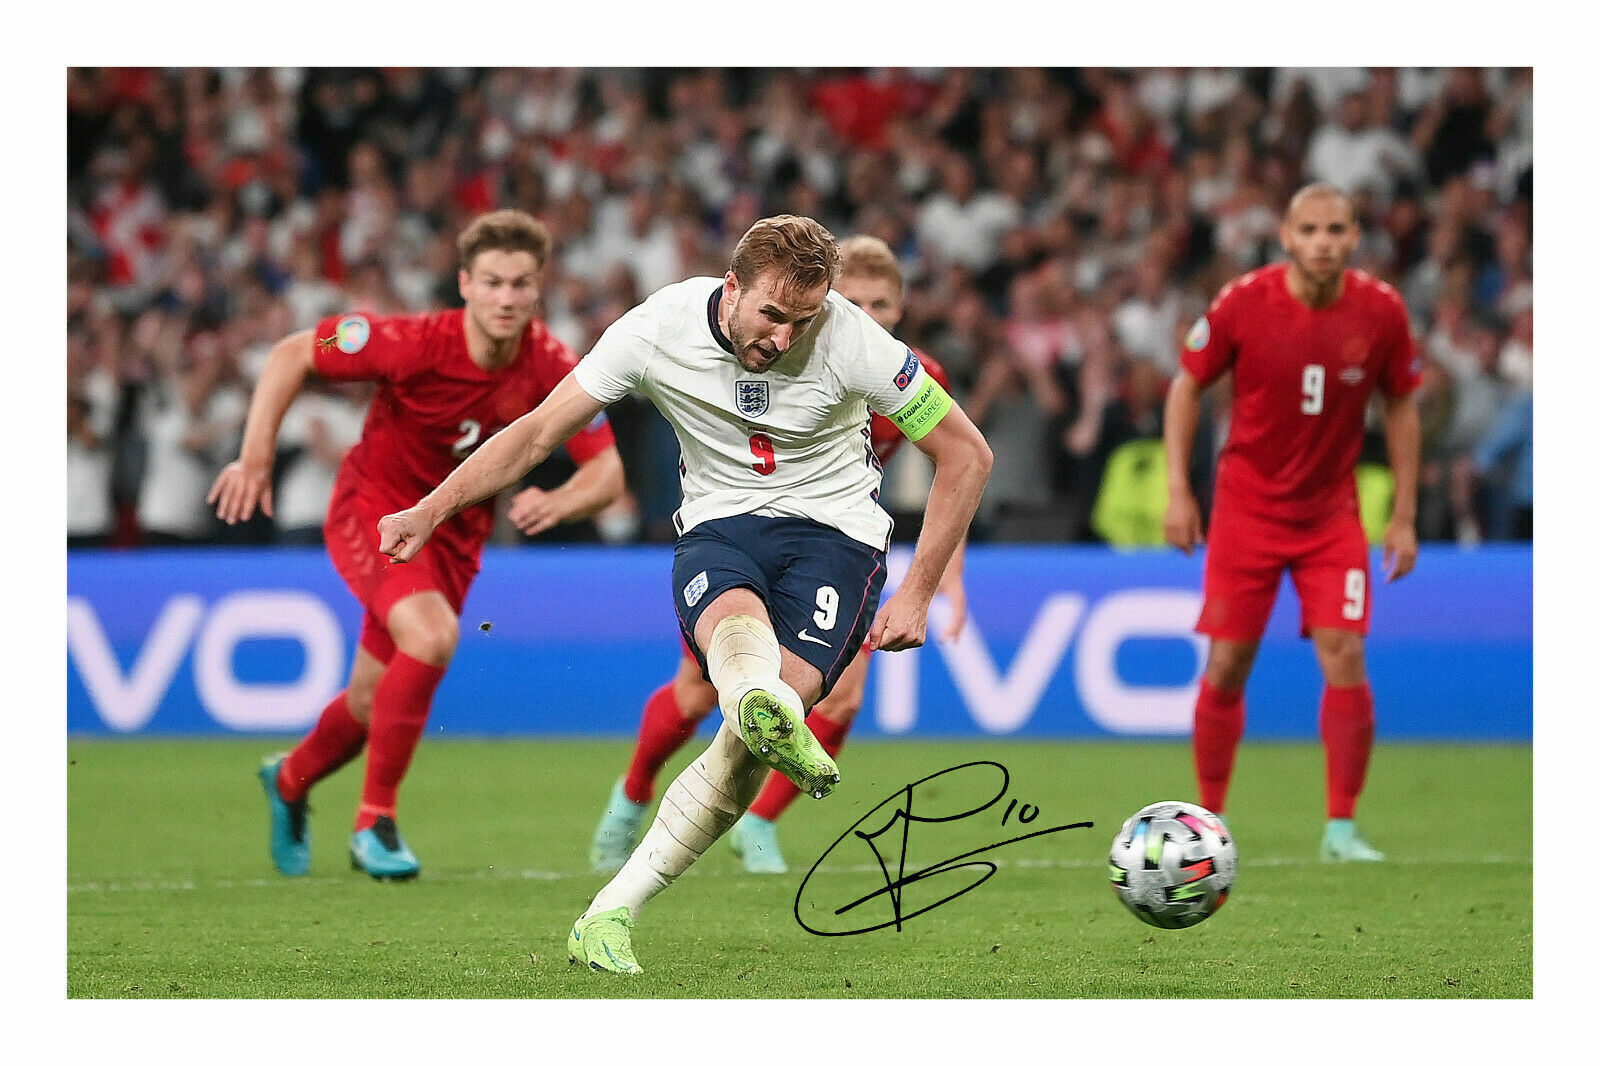 Harry Kane - England Euro 2020 2021 Autograph Signed Photo Poster painting Print